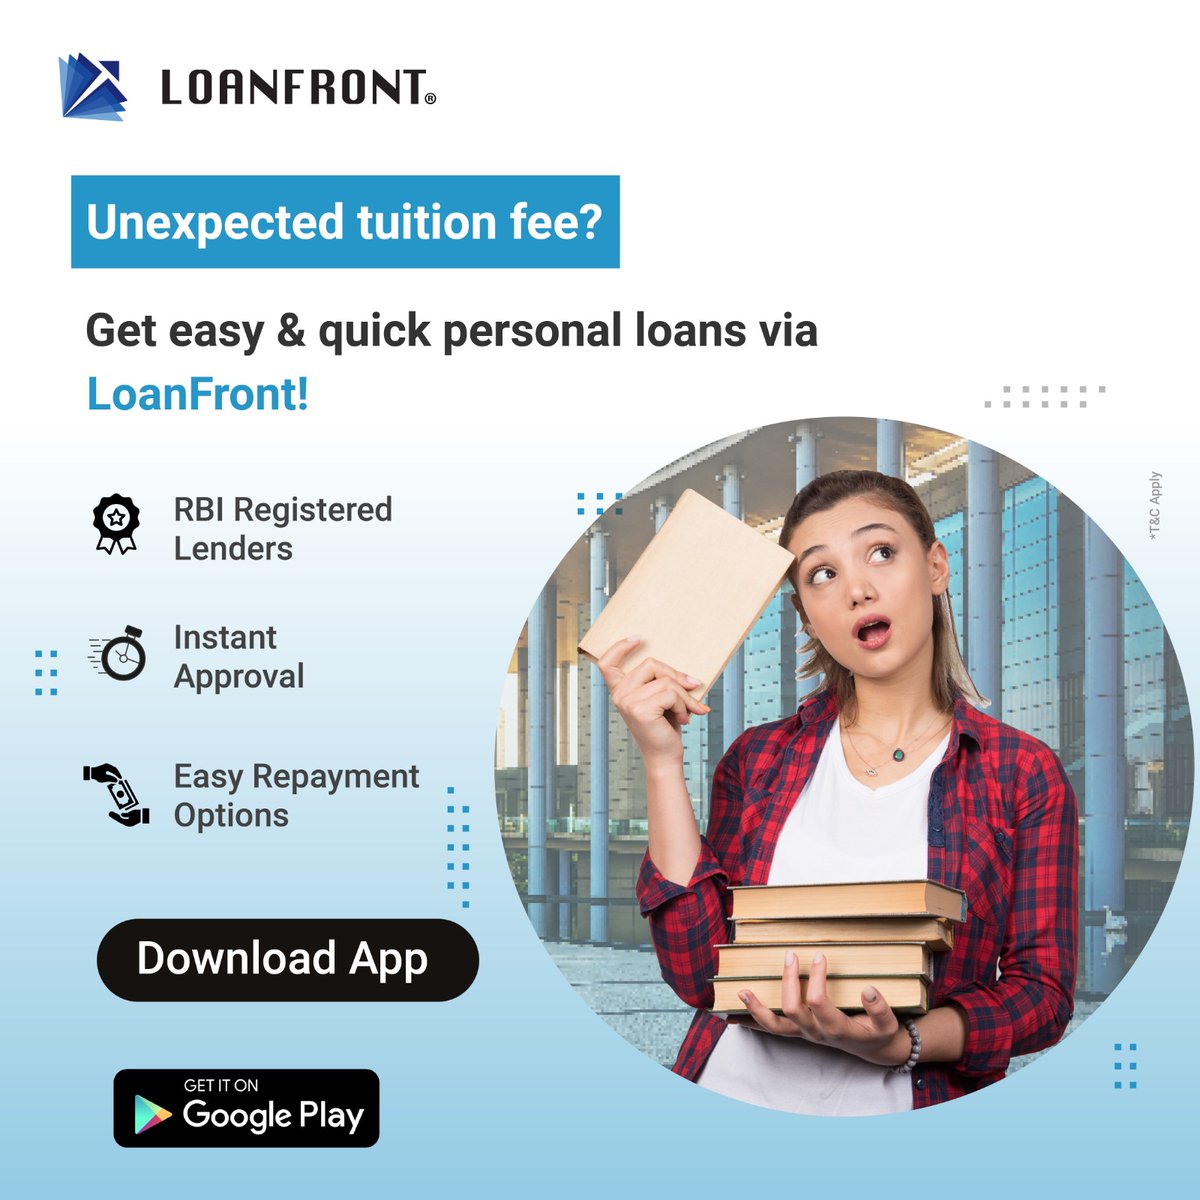 Struggling with an unexpected tuition fee? LoanFront has you covered. Get the funds you need to invest in your education today! 💼🎓 
#LoanFront #PersonalLoans #GoLoanFront #loanservices #loans #instantloanonline